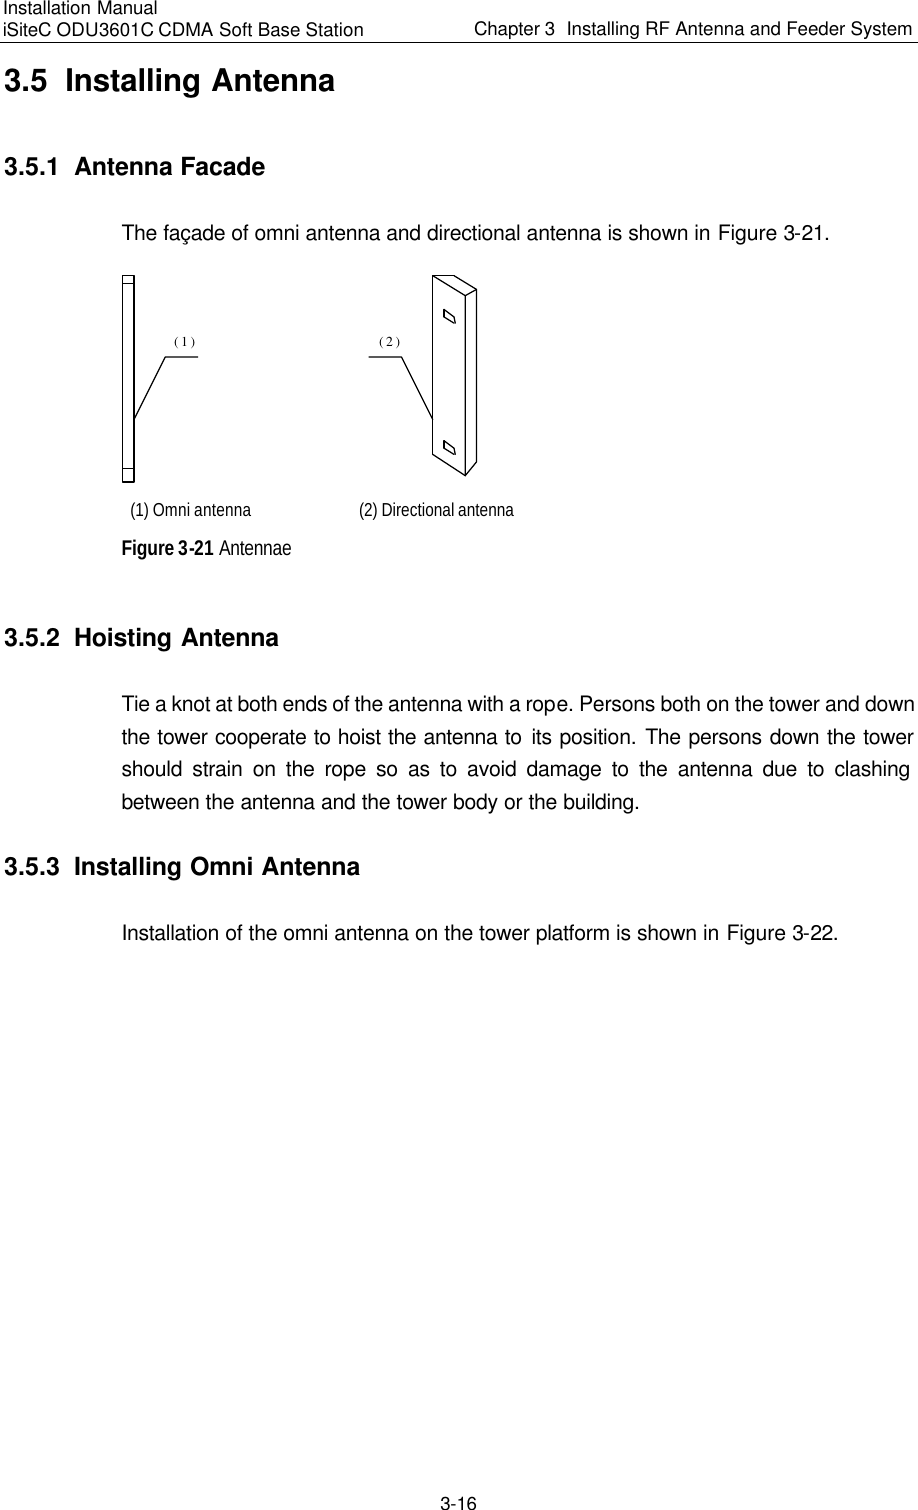 Installation Manual   iSiteC ODU3601C CDMA Soft Base Station Chapter 3  Installing RF Antenna and Feeder System  3-16 3.5  Installing Antenna 3.5.1  Antenna Facade The façade of omni antenna and directional antenna is shown in Figure 3-21. (1)(2) (1) Omni antenna (2) Directional antenna Figure 3-21 Antennae 3.5.2  Hoisting Antenna Tie a knot at both ends of the antenna with a rope. Persons both on the tower and down the tower cooperate to hoist the antenna to its position. The persons down the tower should strain on the rope so as to avoid damage to the antenna due to clashing between the antenna and the tower body or the building. 3.5.3  Installing Omni Antenna Installation of the omni antenna on the tower platform is shown in Figure 3-22. 